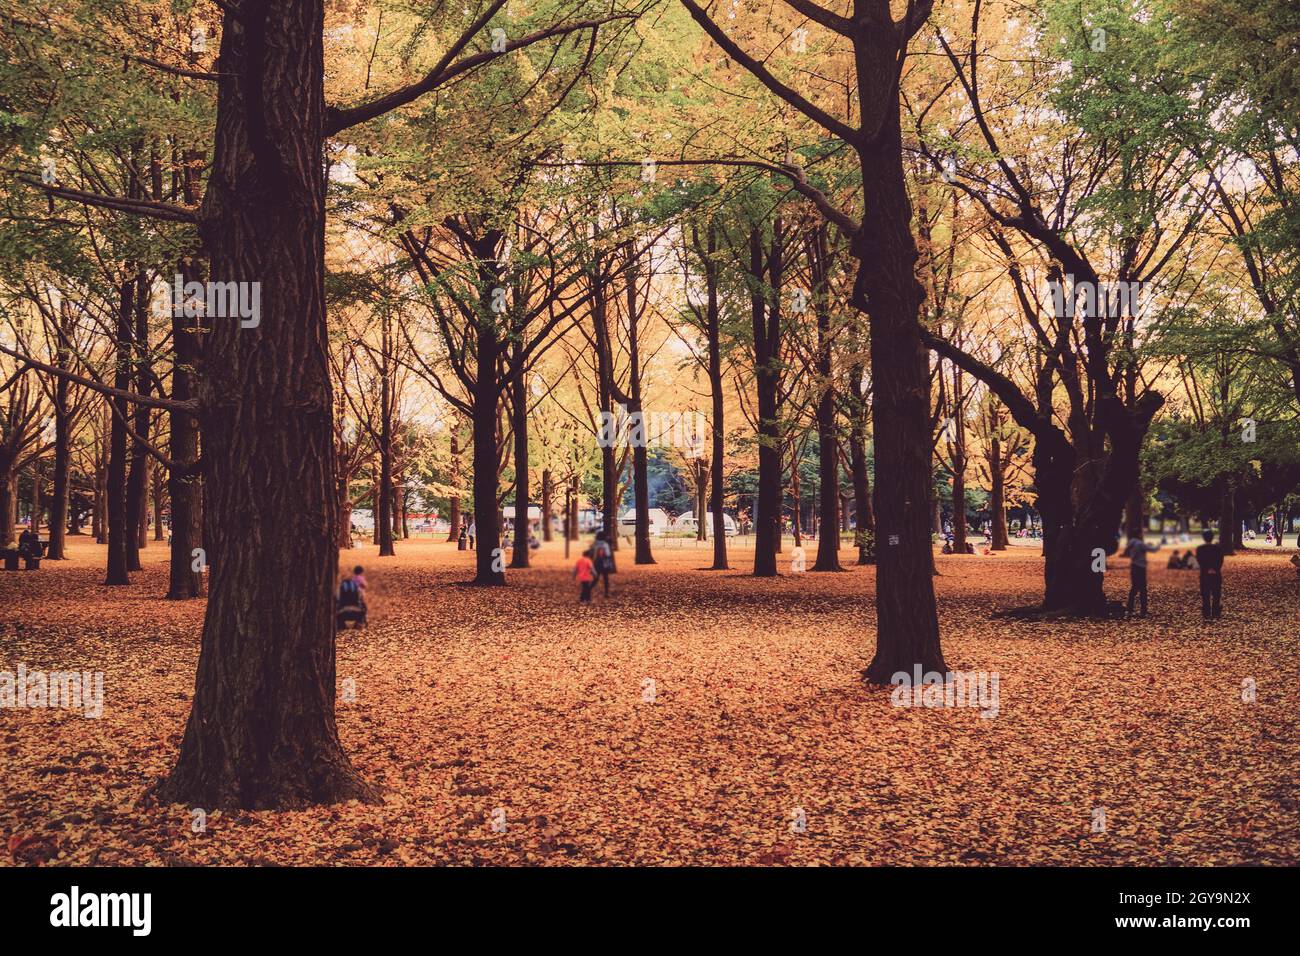 Yoyogi Park, which is covered in autumn leaves. Shooting Location: Tokyo metropolitan area Stock Photo